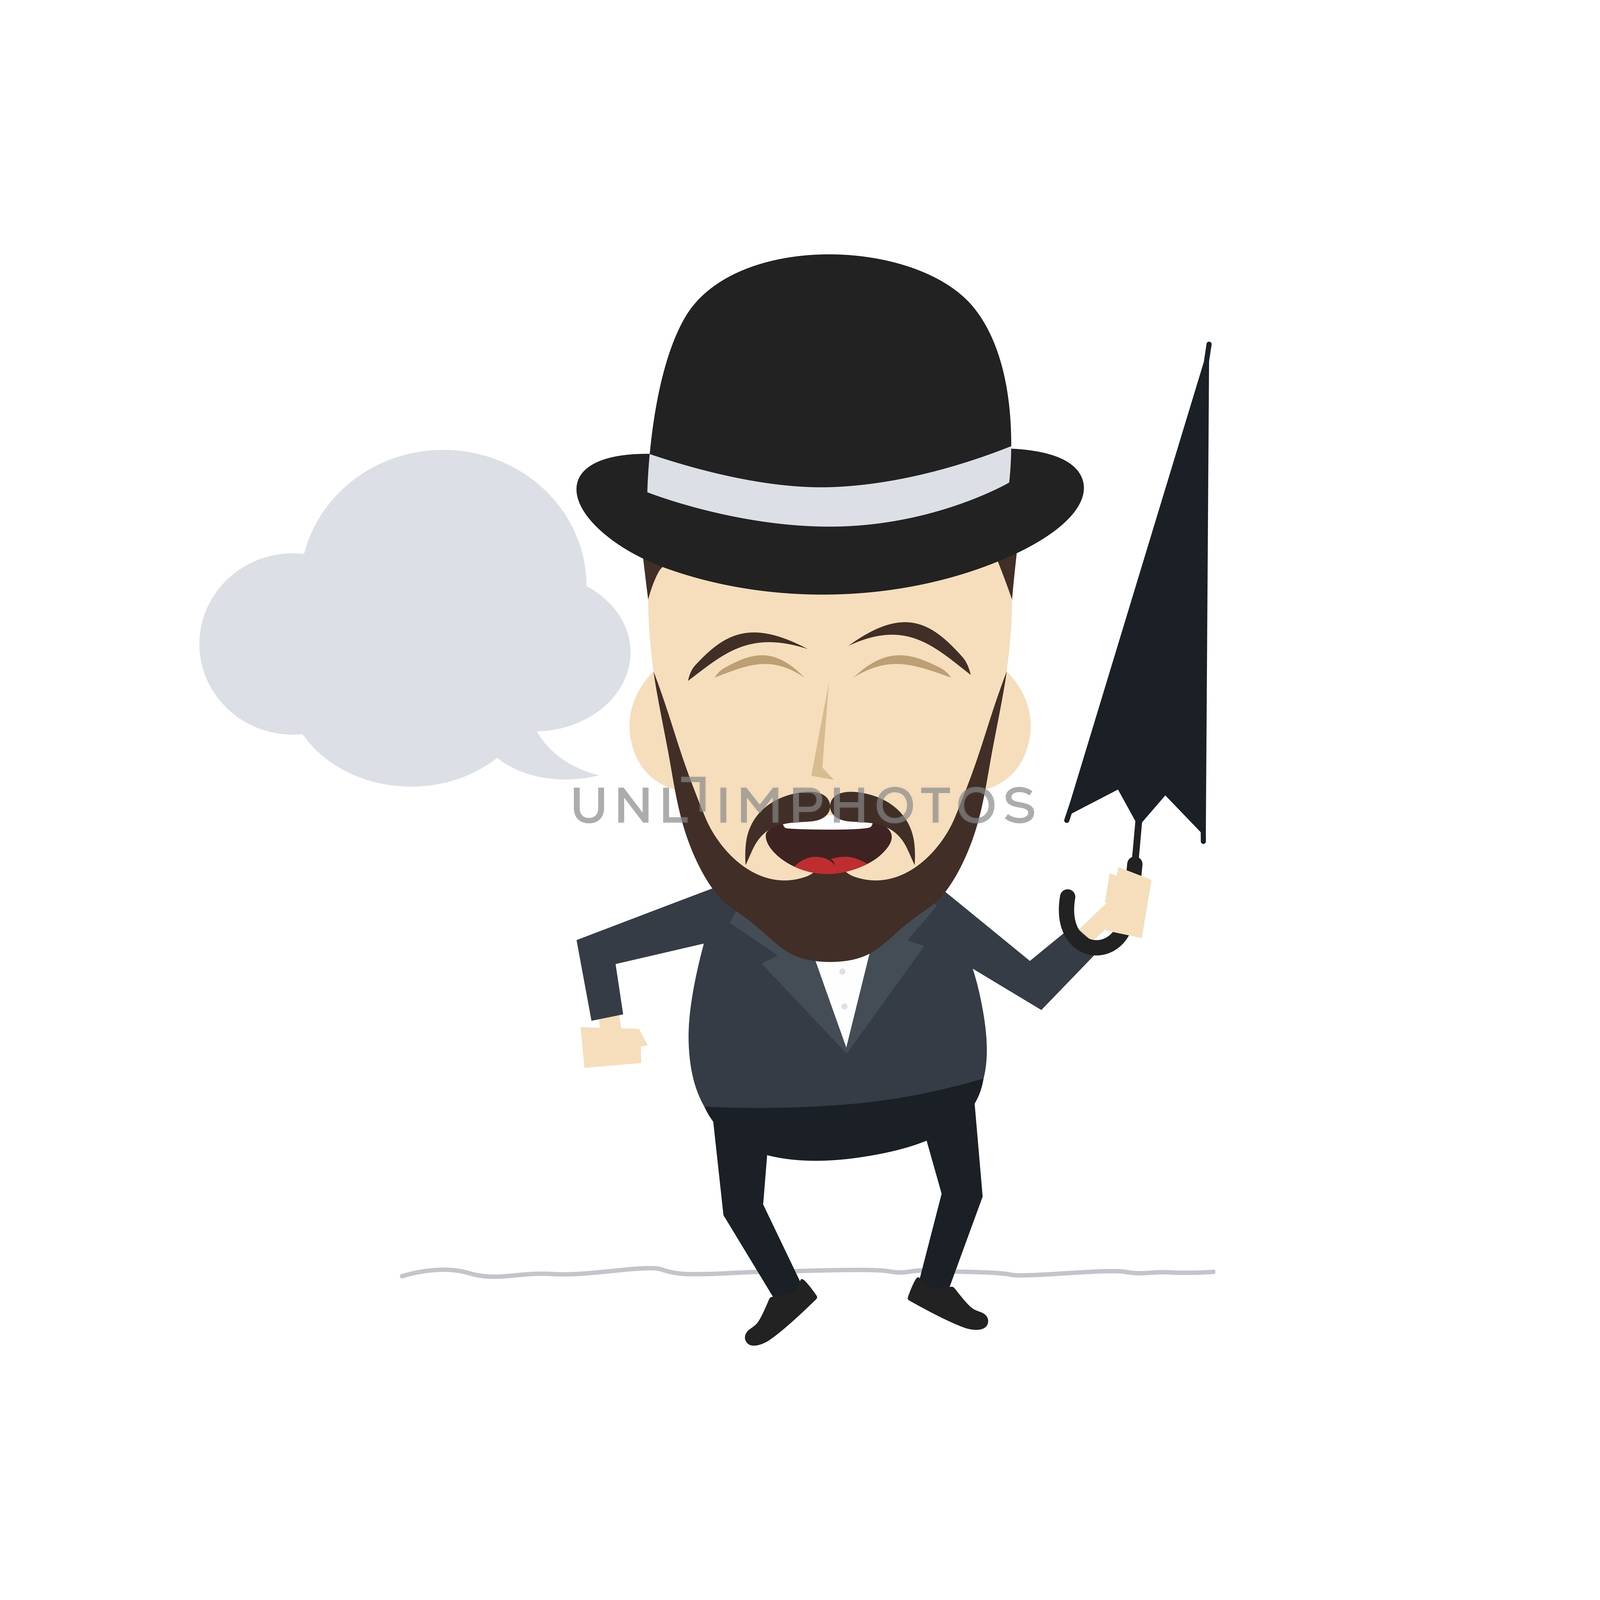 fun guy with umbrella and bowl hat vector art illustration